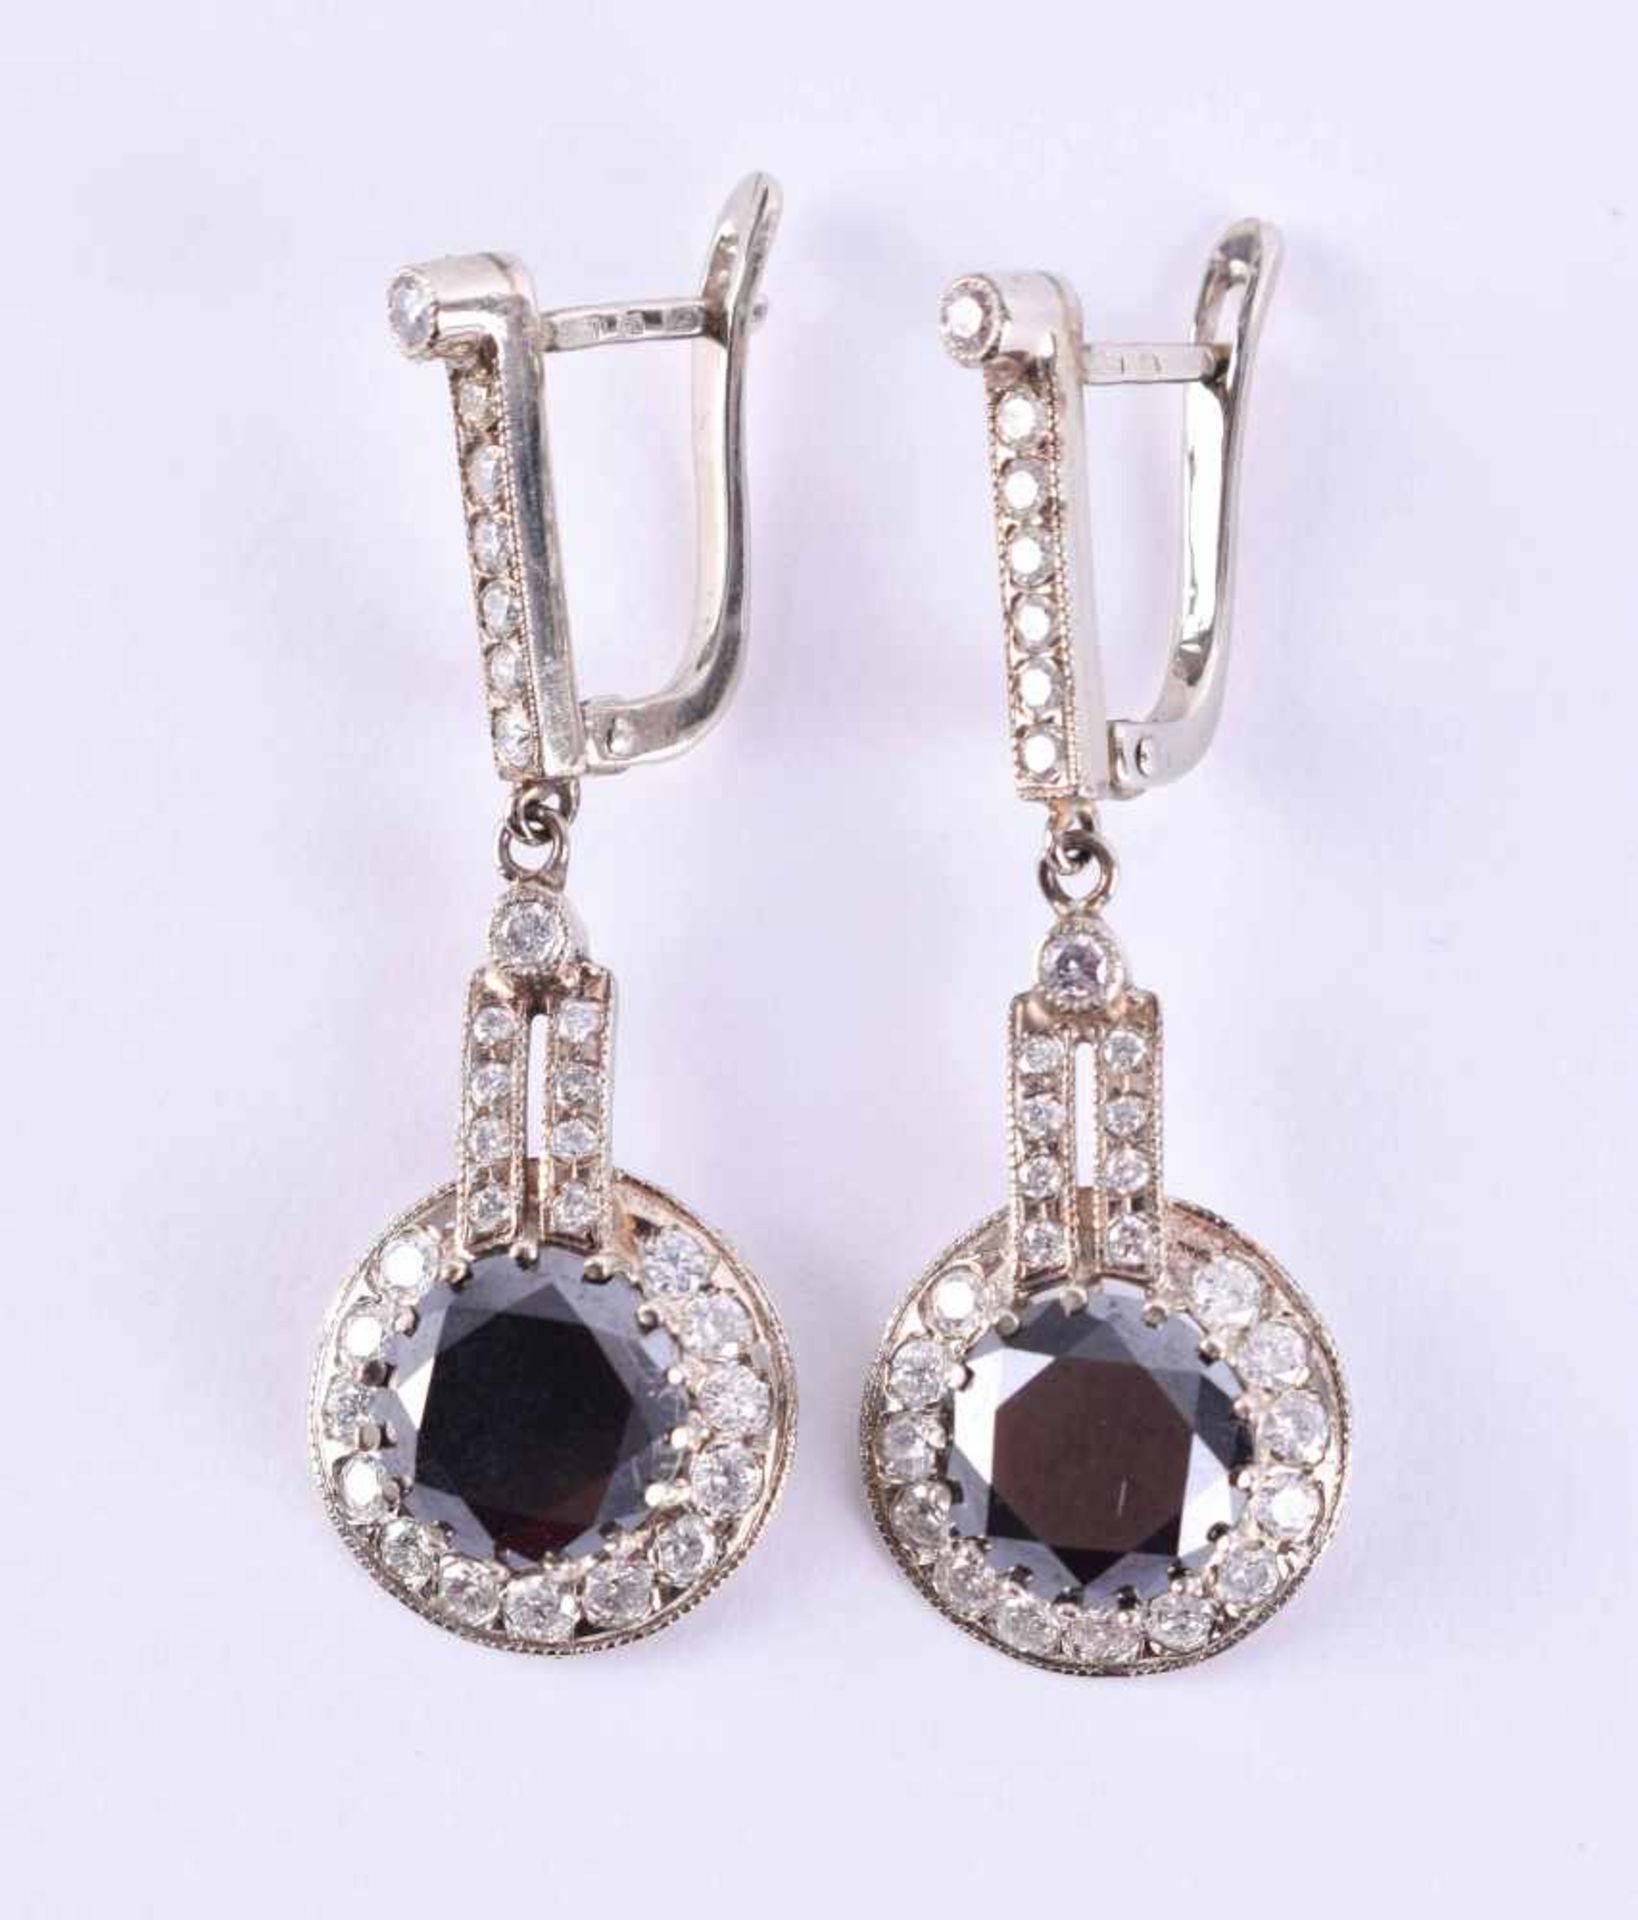 Brillant earringswhite gold 585/000, in the center each 1 black diamond approx. 2.00 ct, all